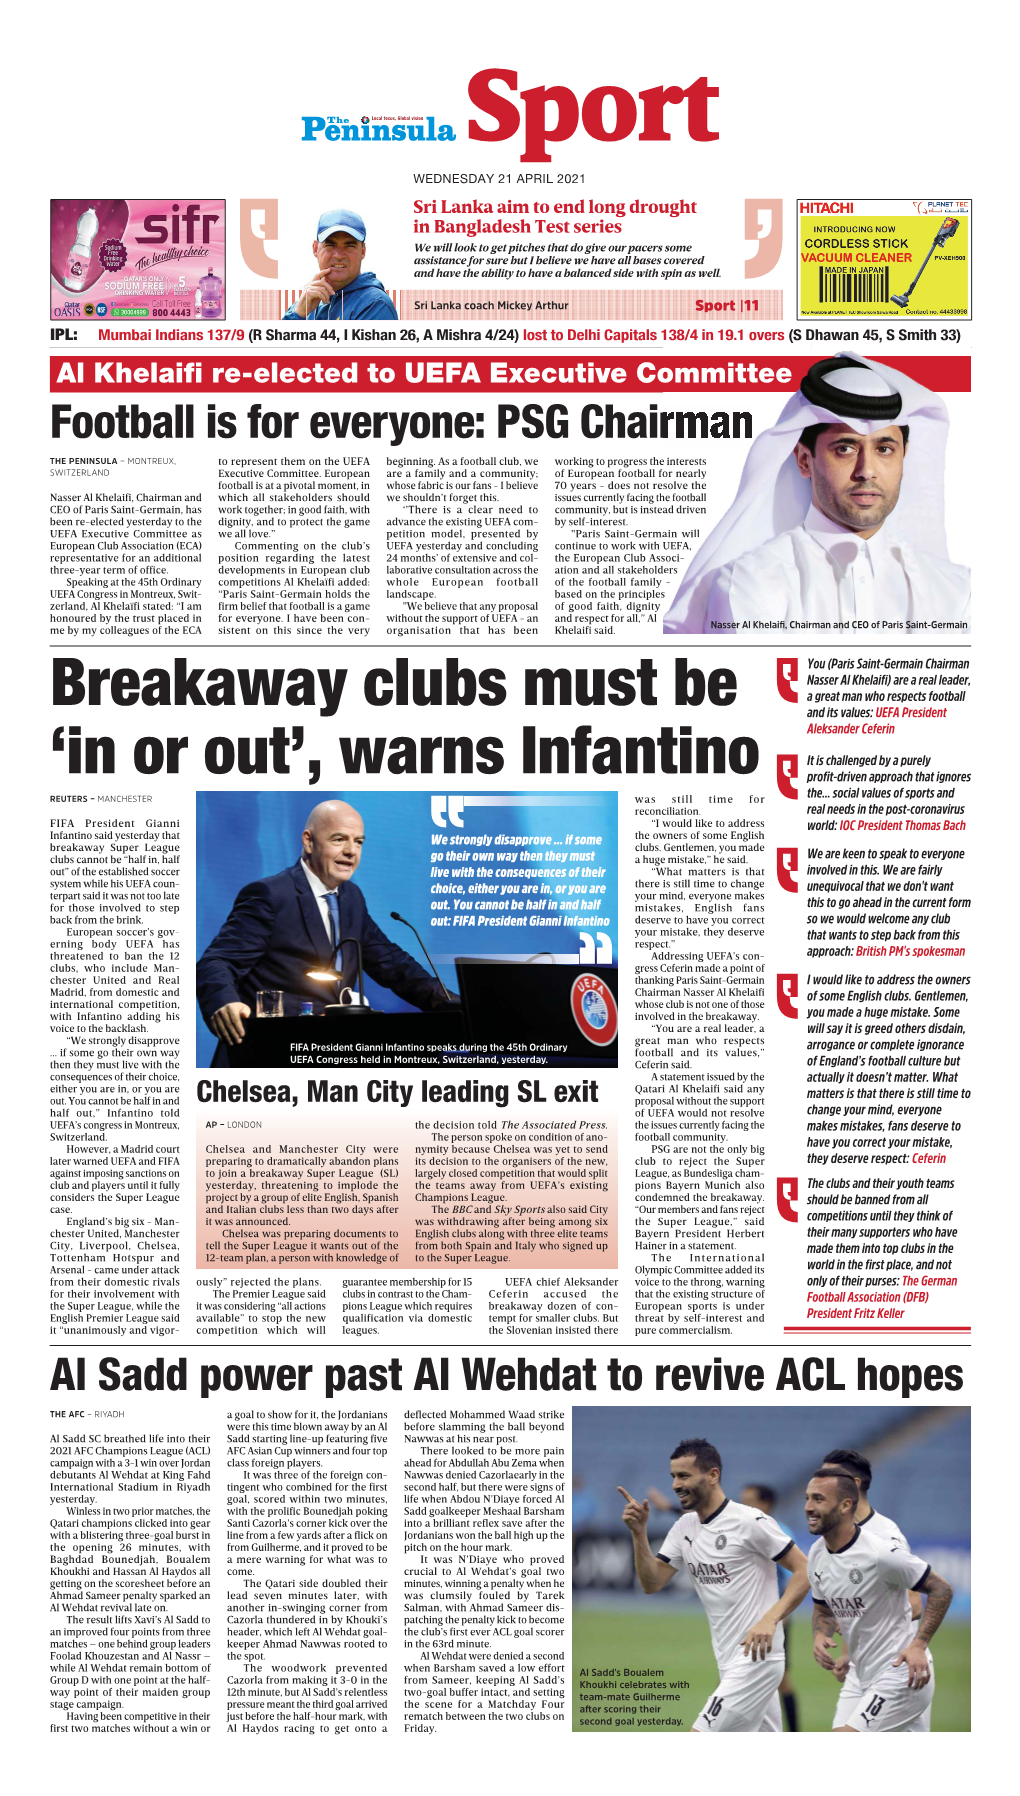 Breakaway Clubs Must Be 'In Or Out', Warns Infantino